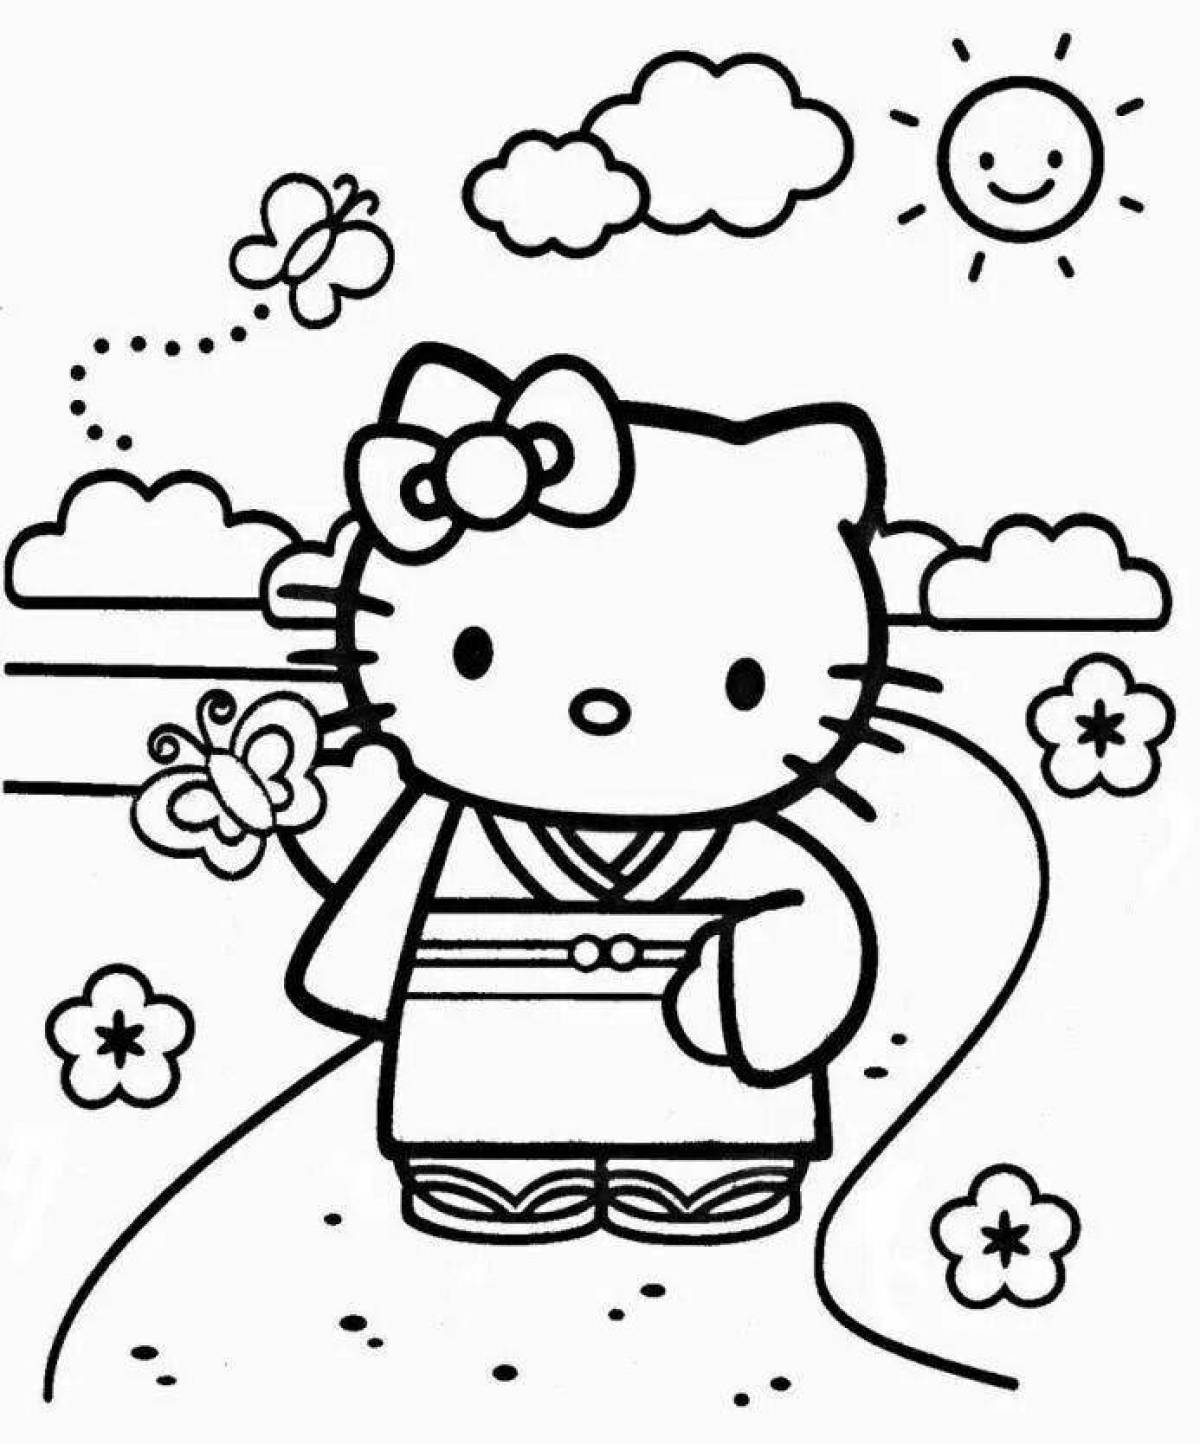 Playful coloring by numbers hello kitty